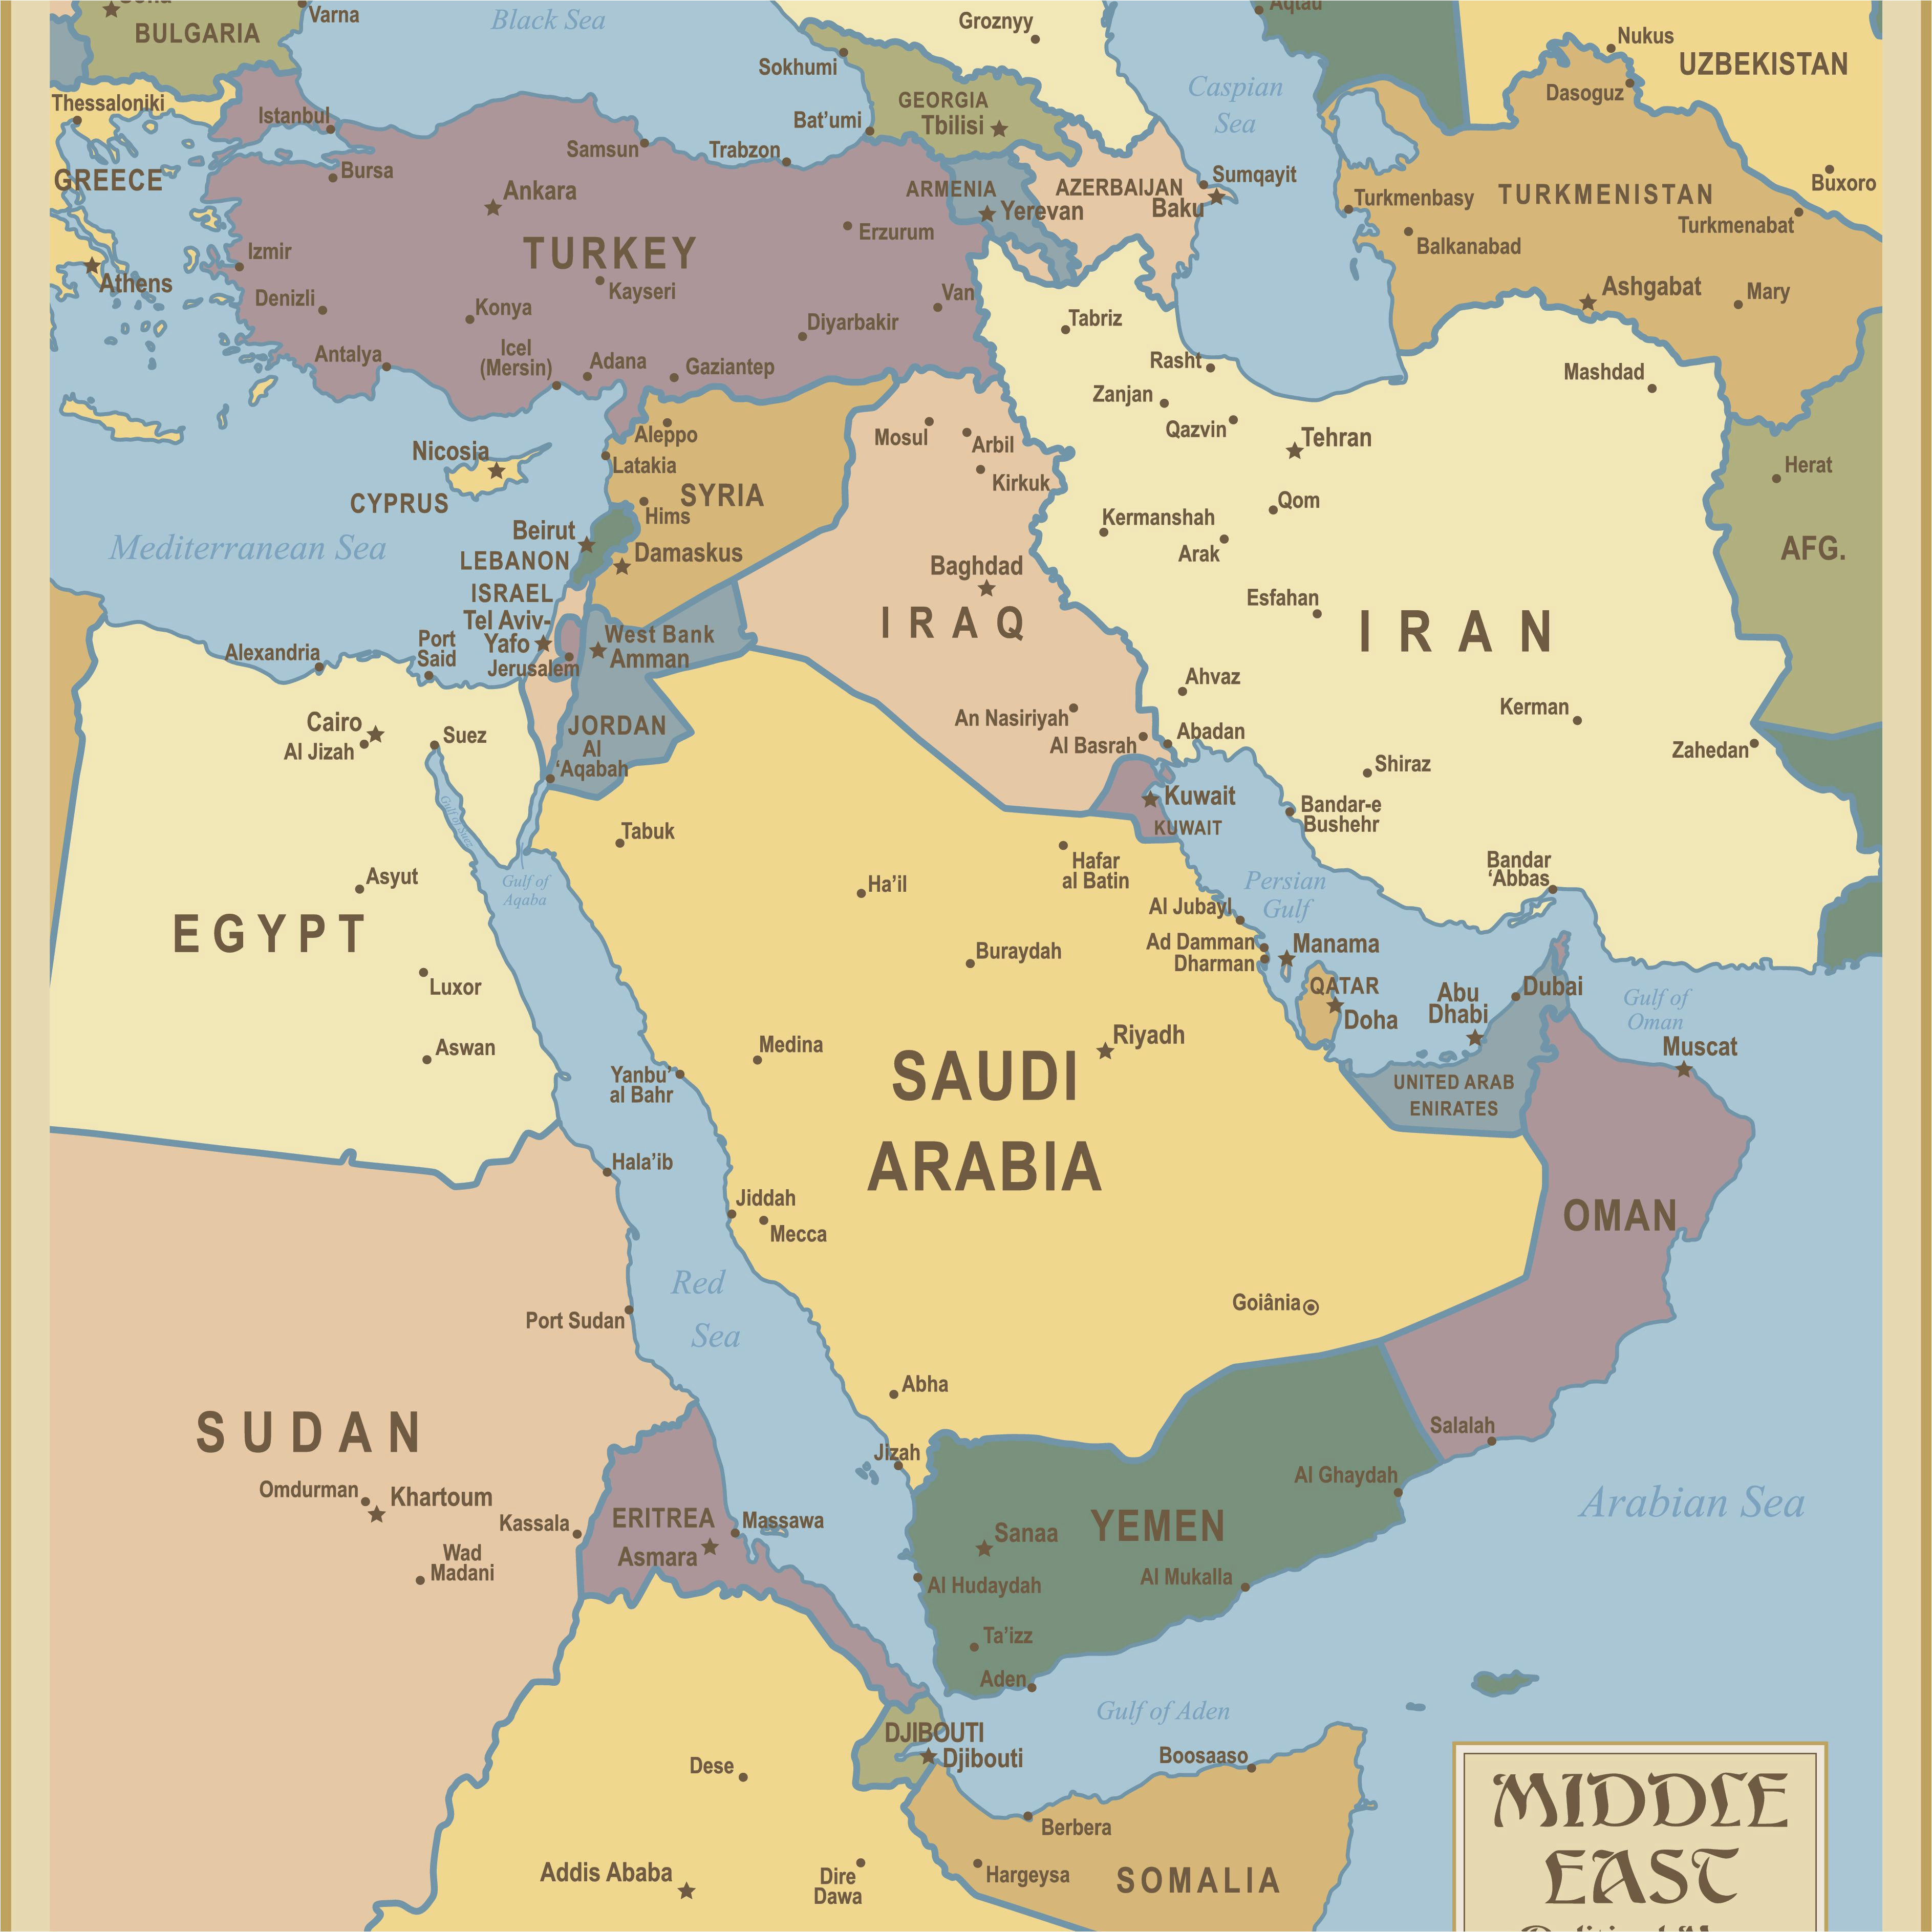 Map Of Eastern Europe And Middle East Red Sea And Southwest Asia Maps Middle East Maps Of Map Of Eastern Europe And Middle East 